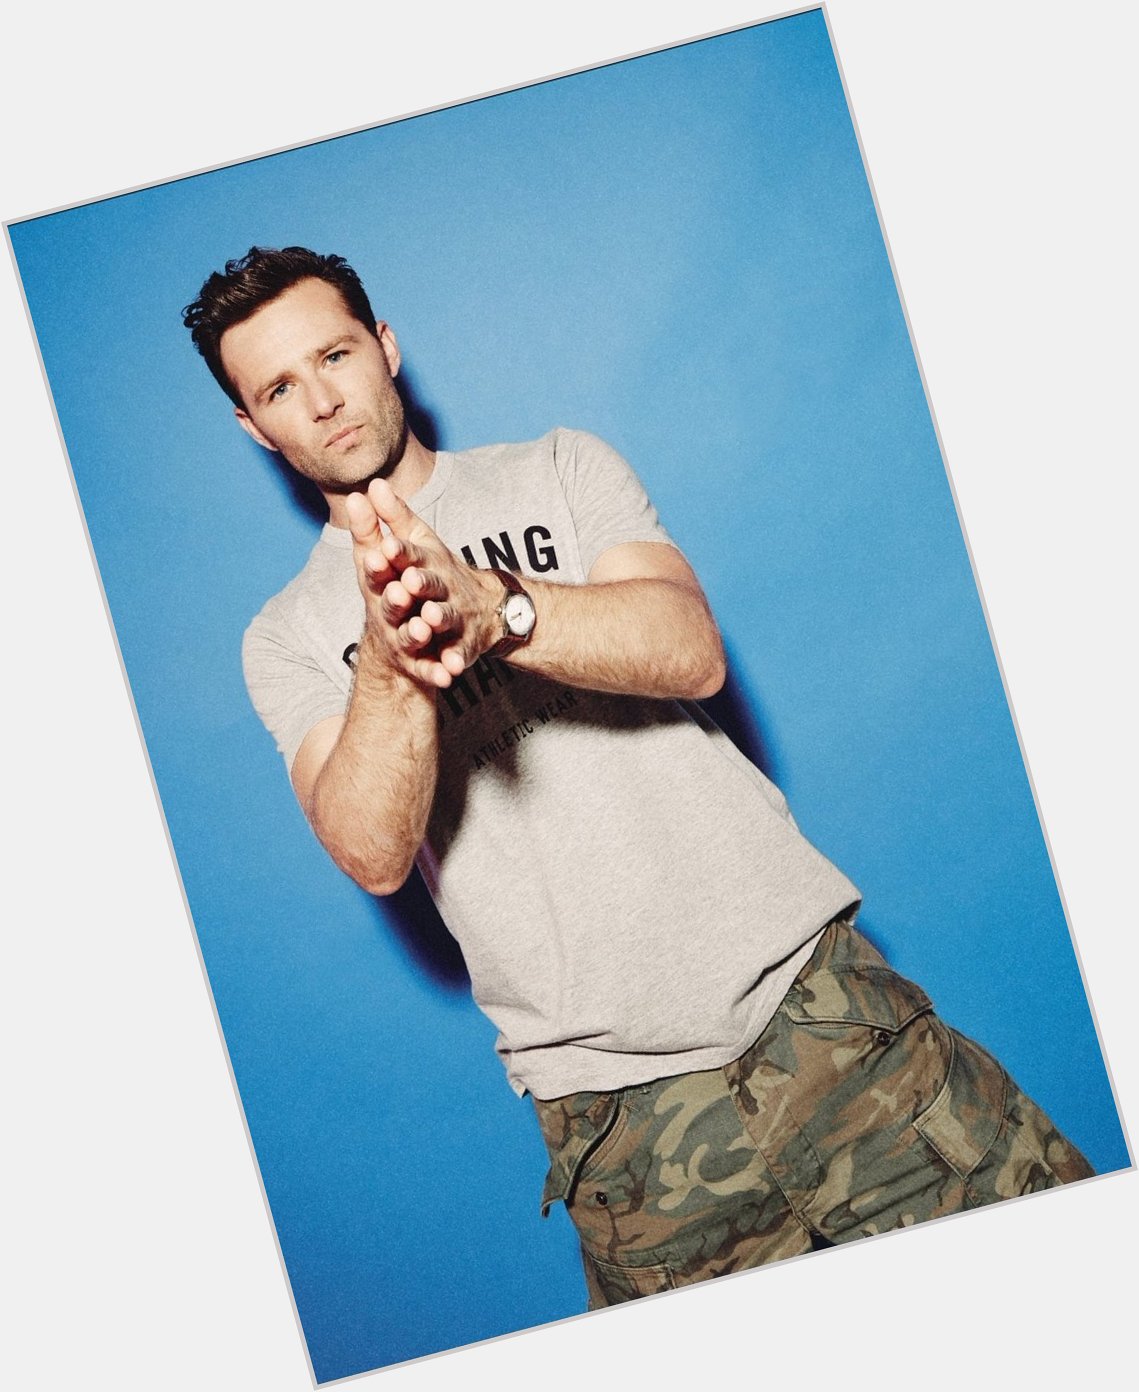 Happy Birthday to Harry Judd, two days before Christmas lol 